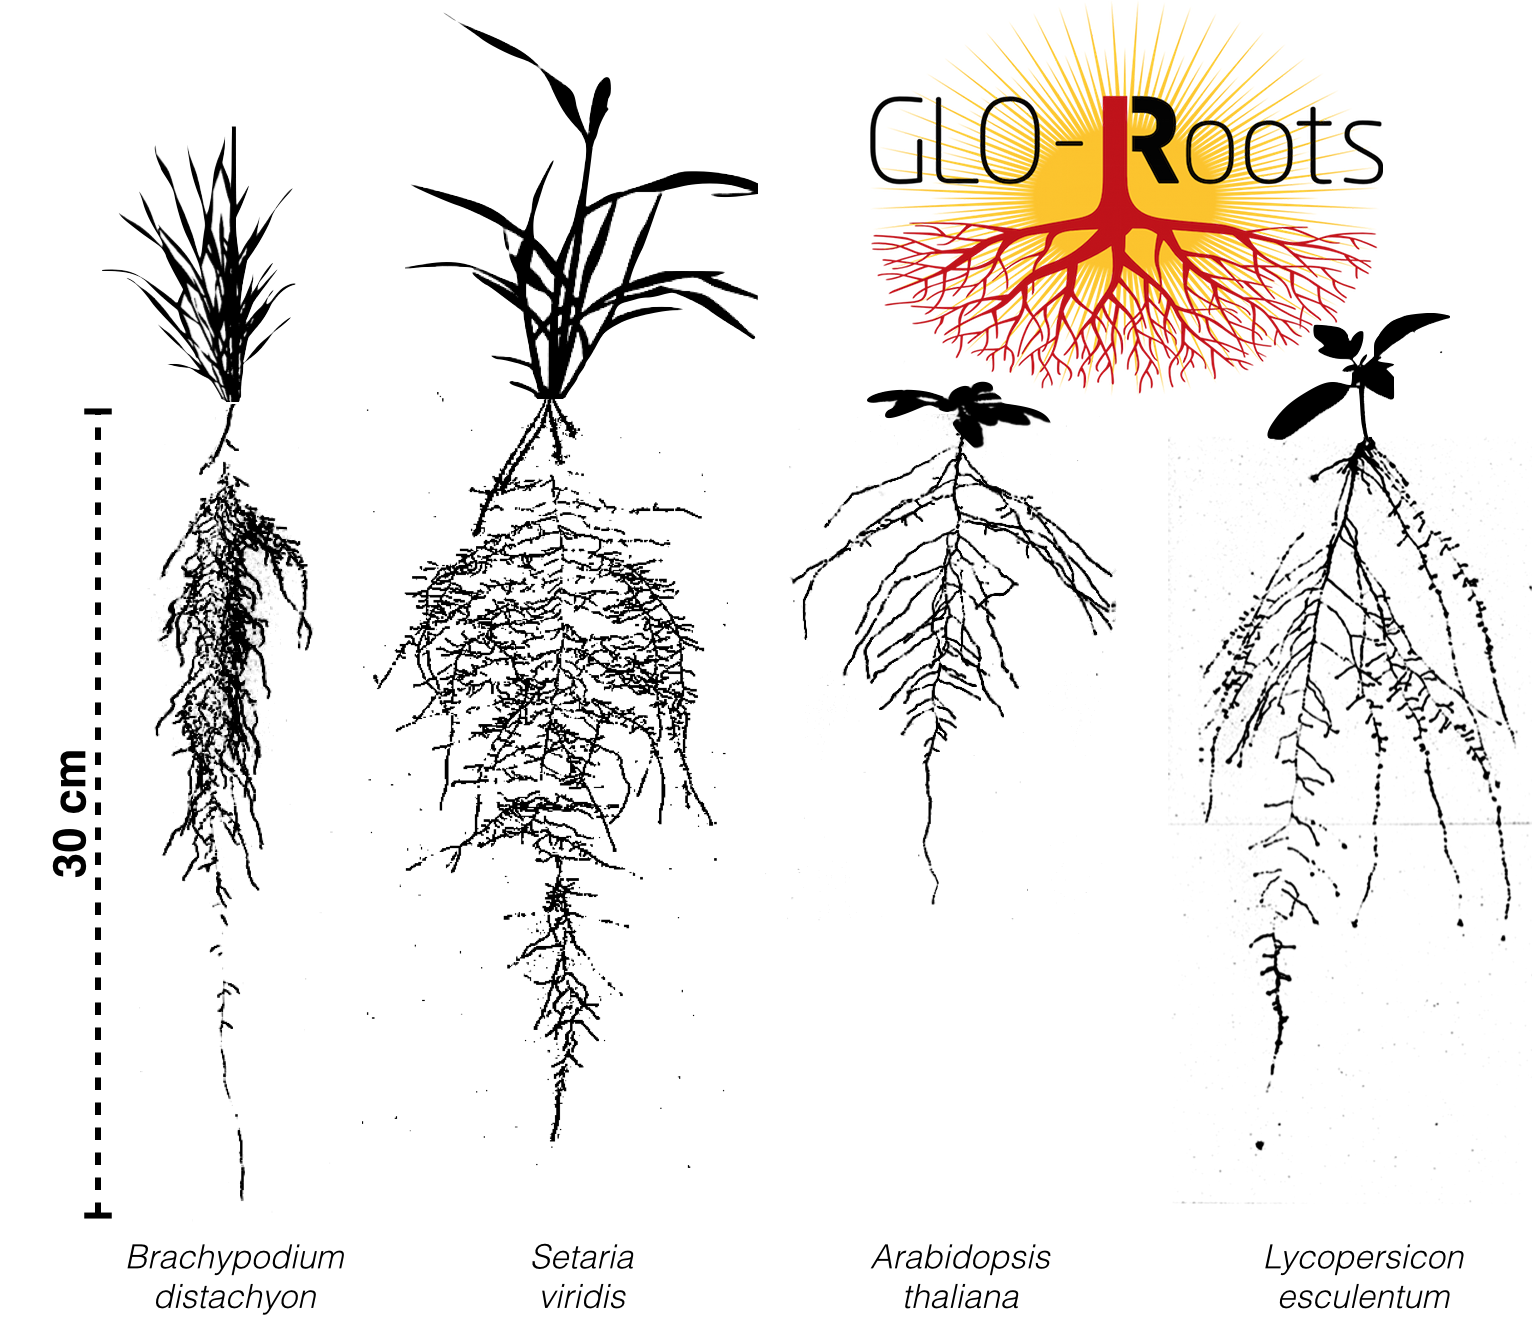 GLO-Roots – Dinneny lab